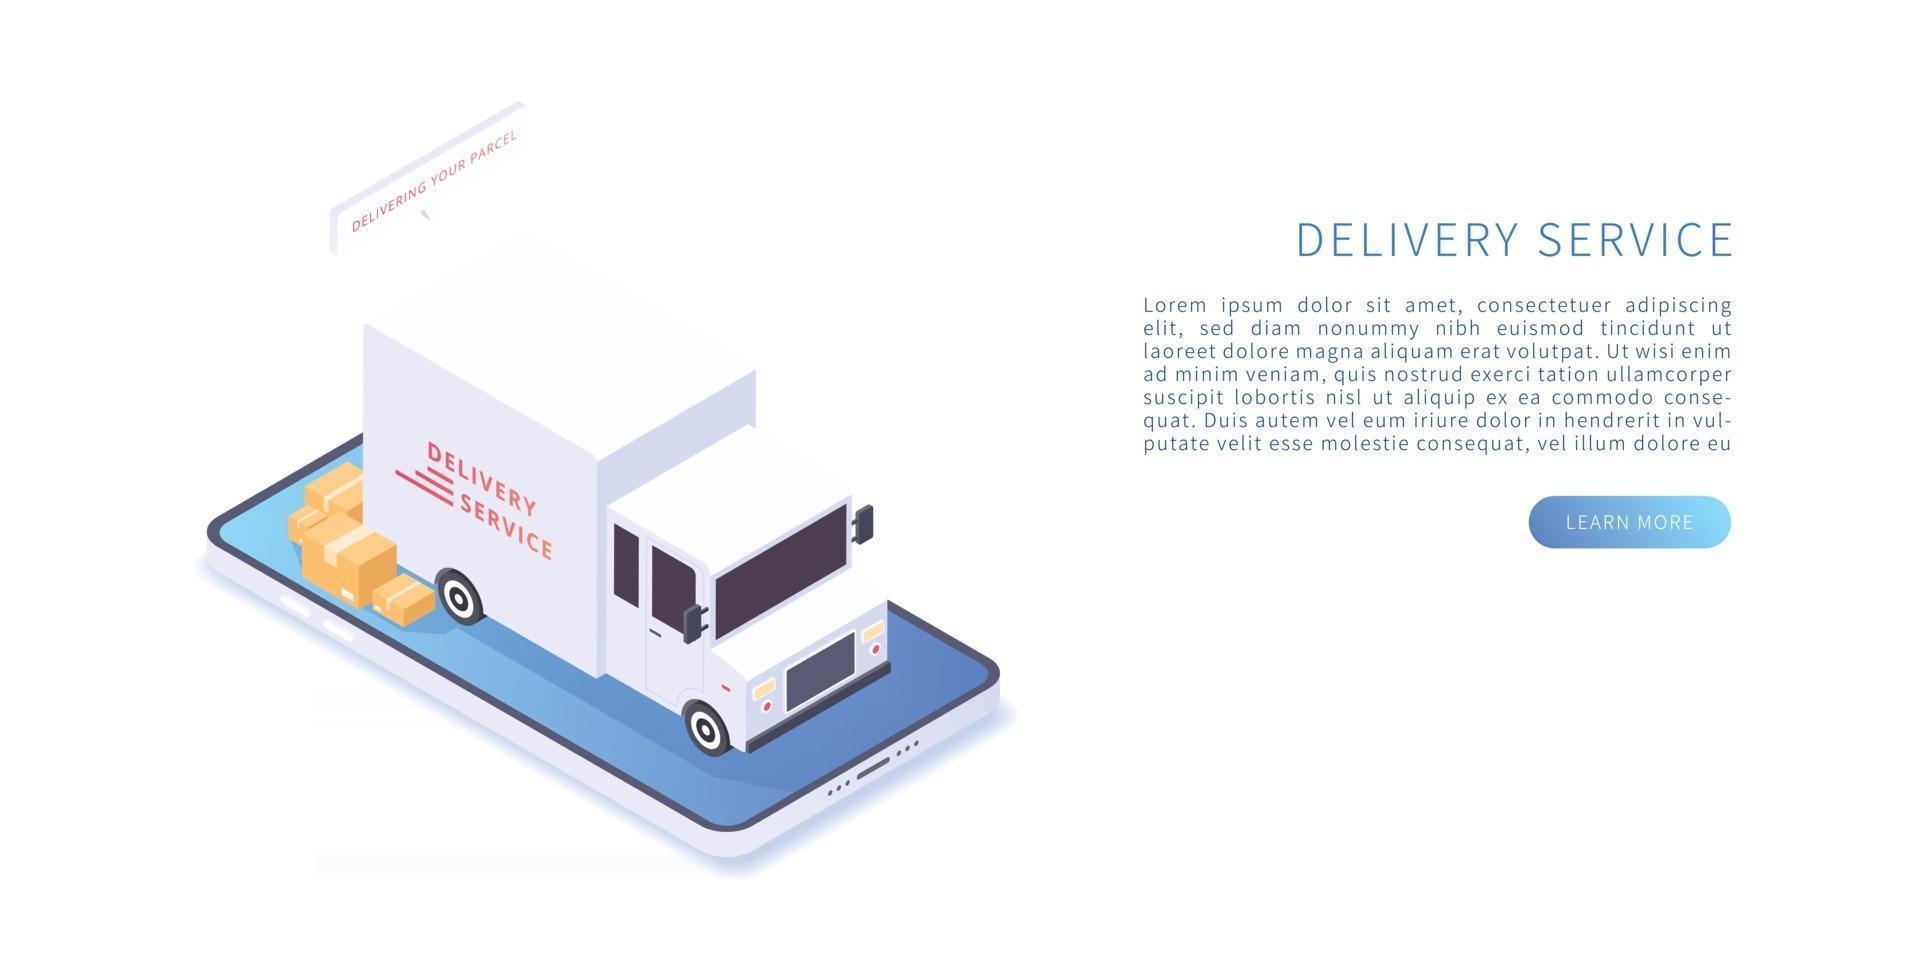 Delivery service with truck and boxes on smartphone vector